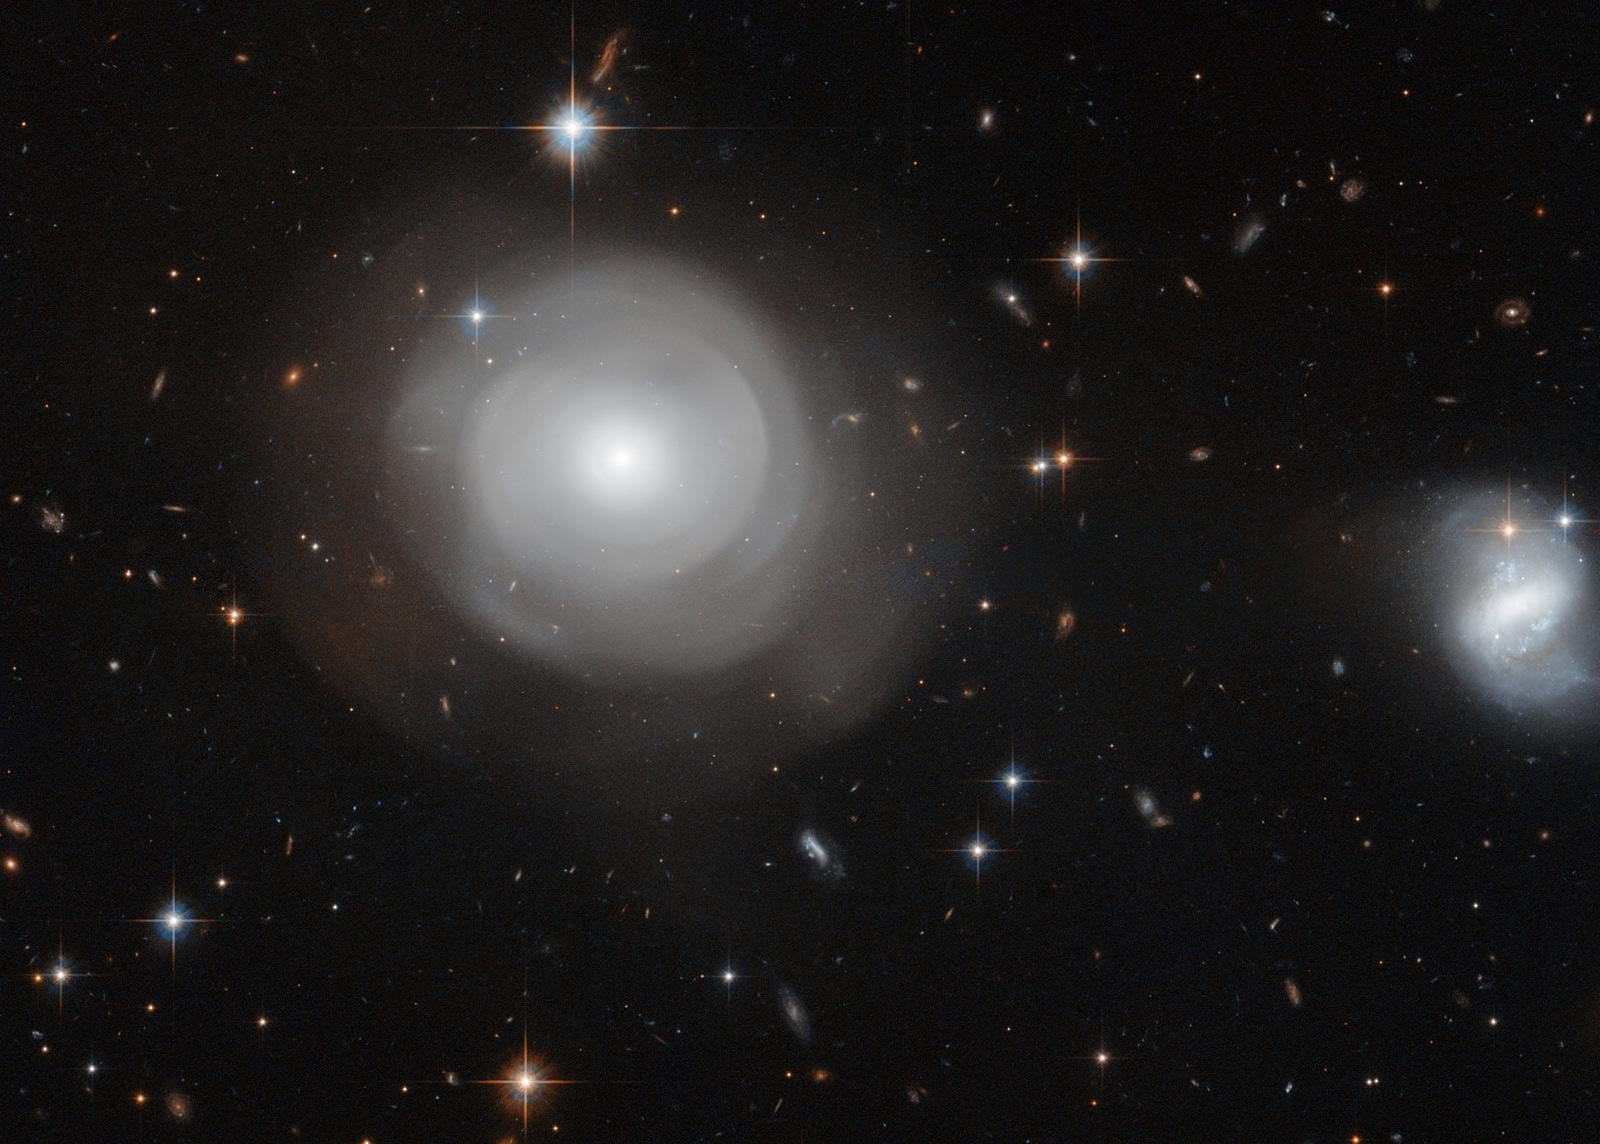 Hubble image of ESO 381-12